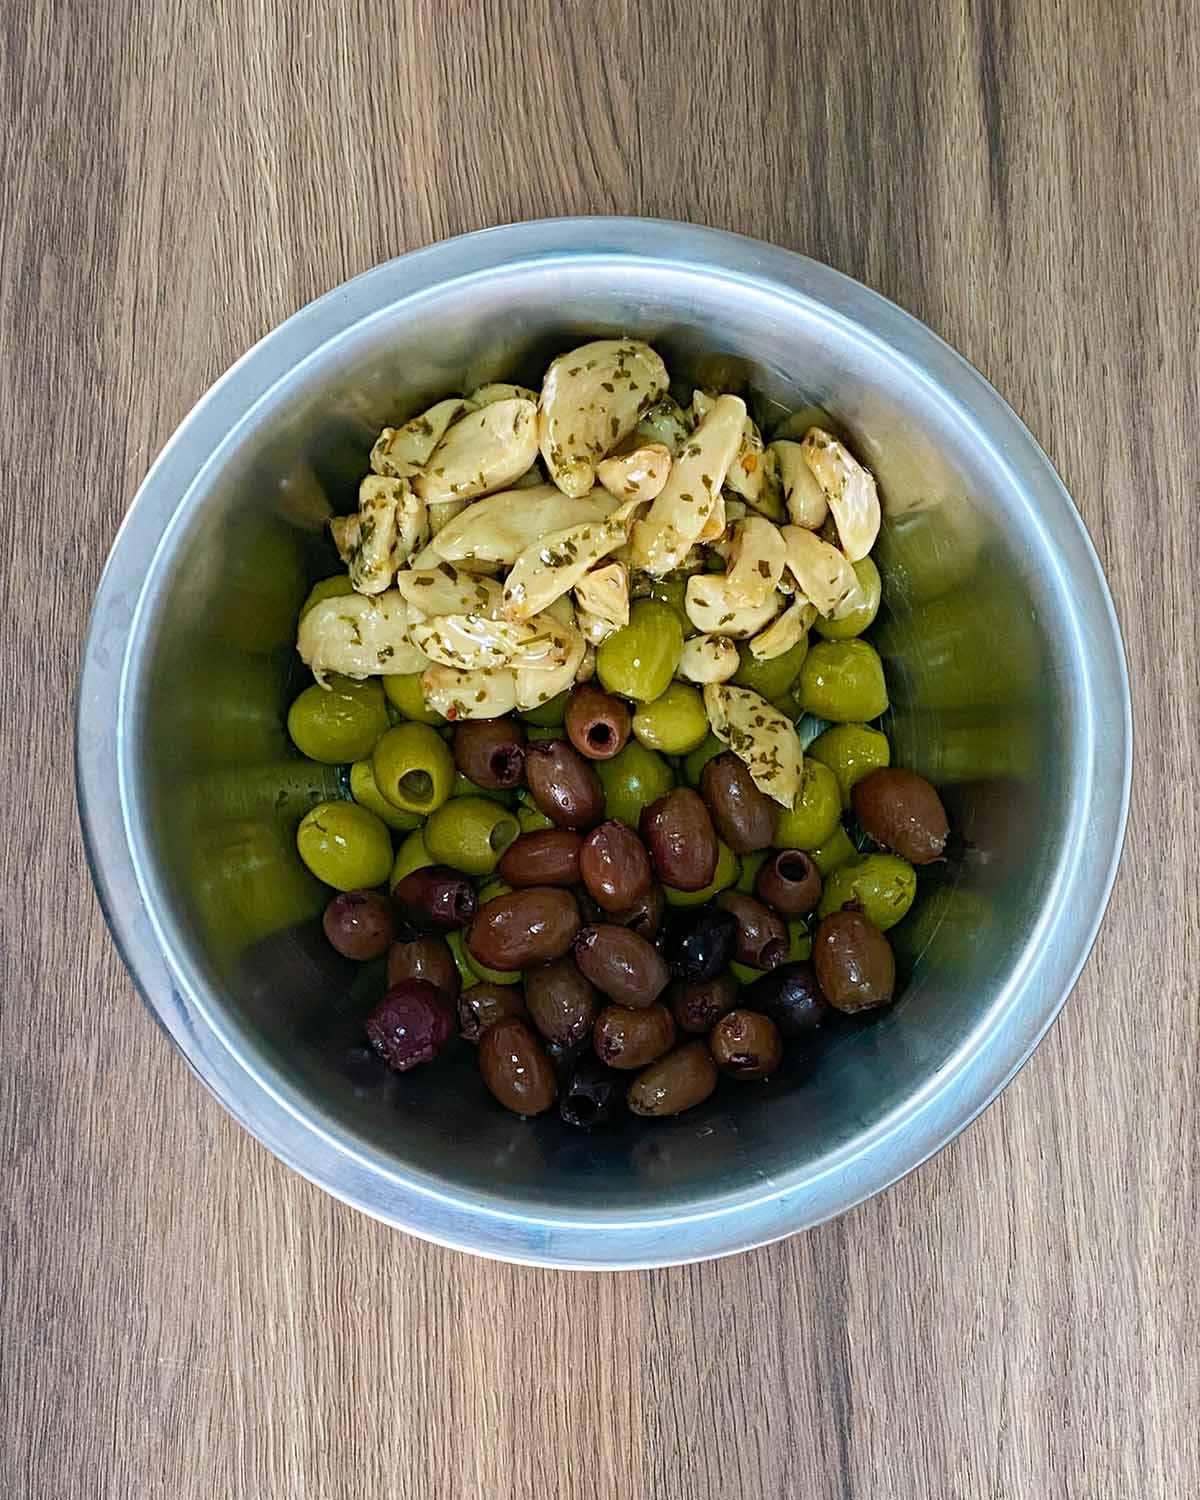 A mixing bowl containing green olives, black olives and garlic cloves.